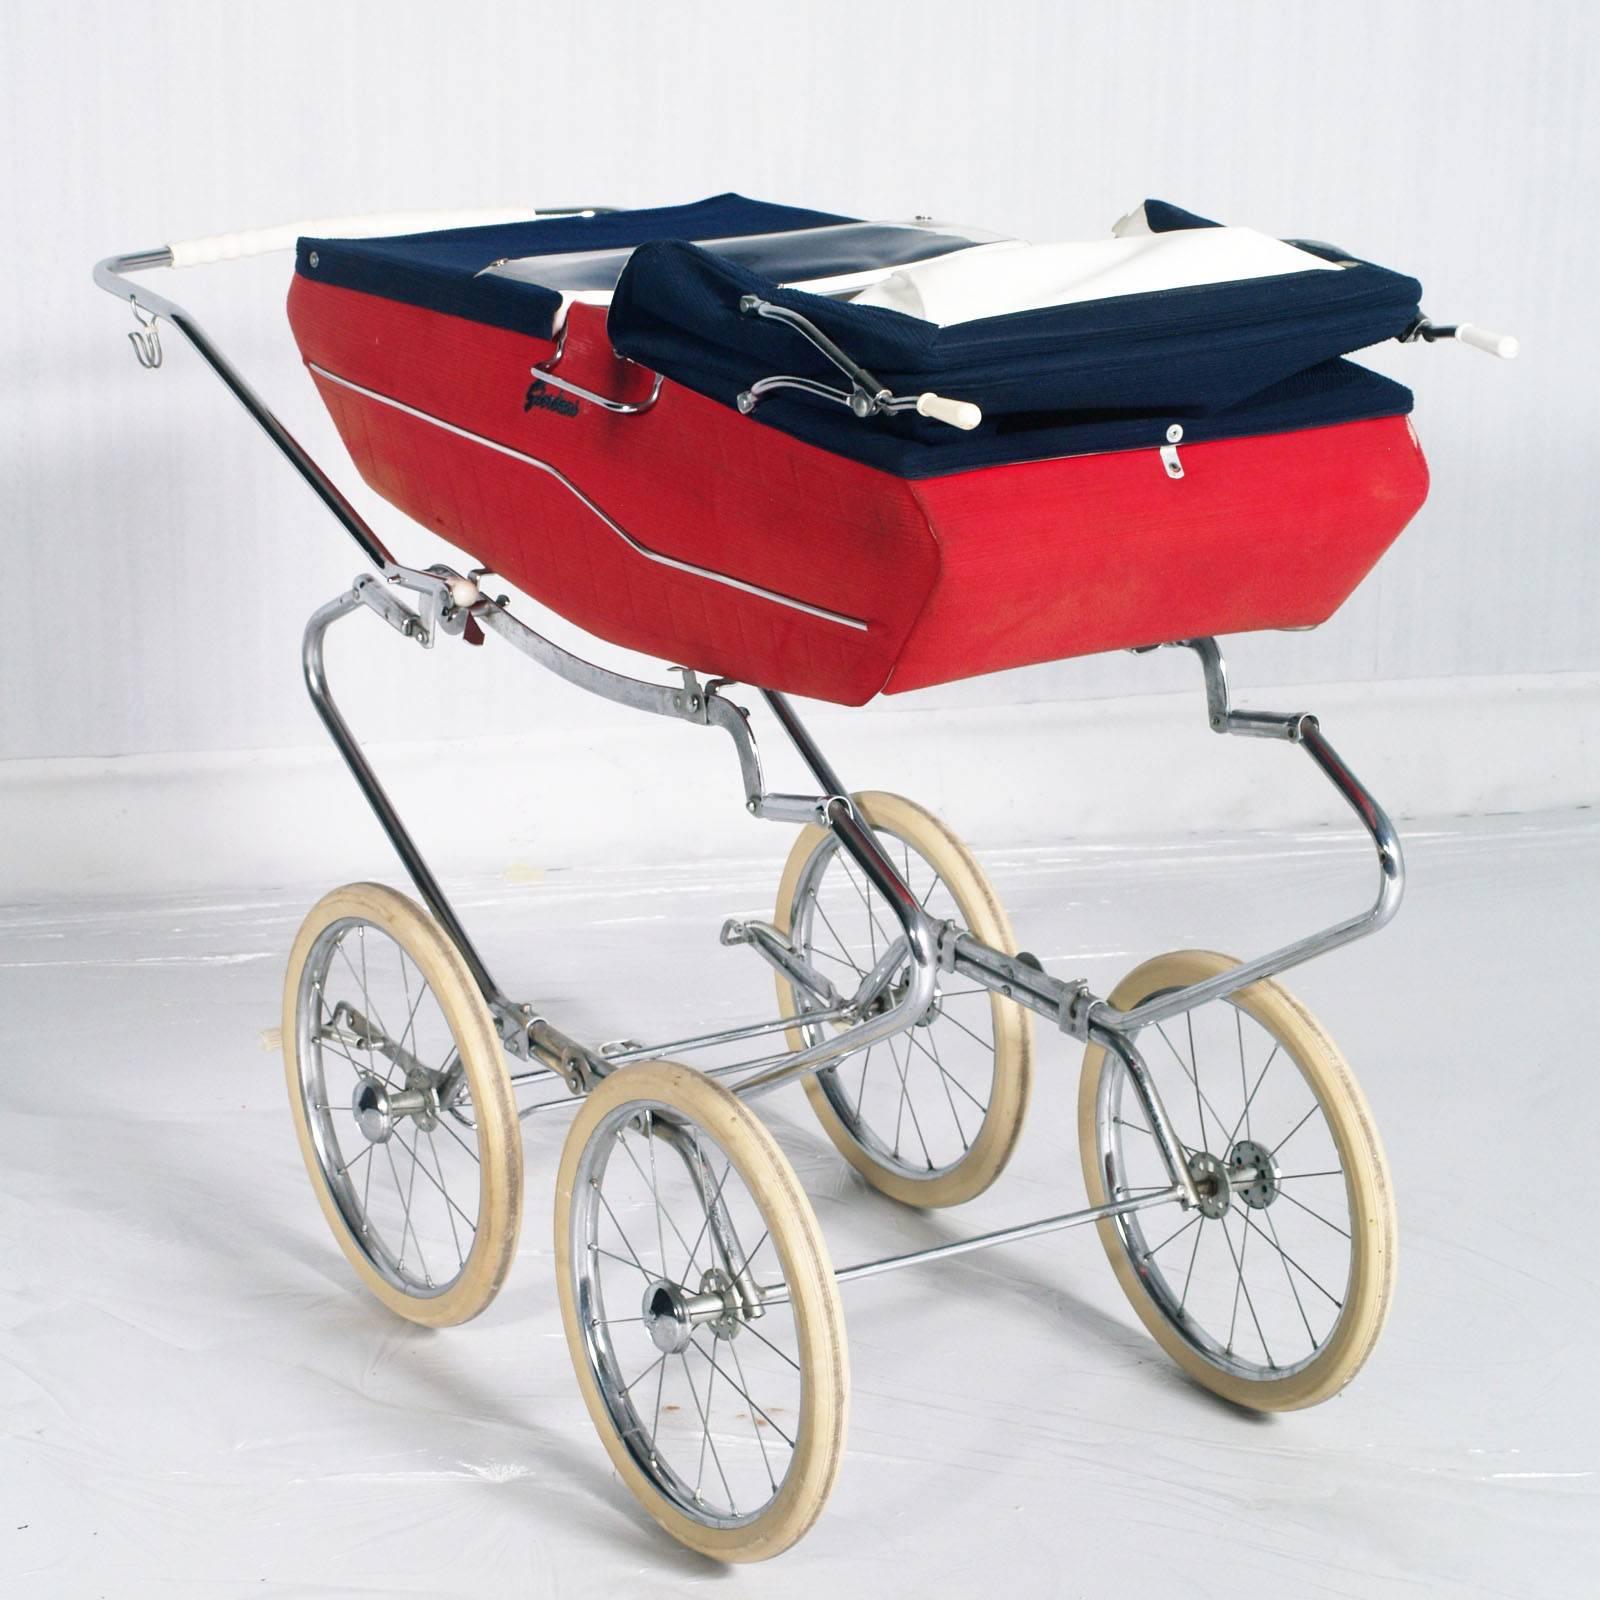 1950s Mid-Century Modern Italian baby carriage pram stroller by Giordani
Excellent conditions

Measures cm: H 86/117 W 120 D 50

The fabulous Giordani pram, an important piece of Italian design from the 1950s.